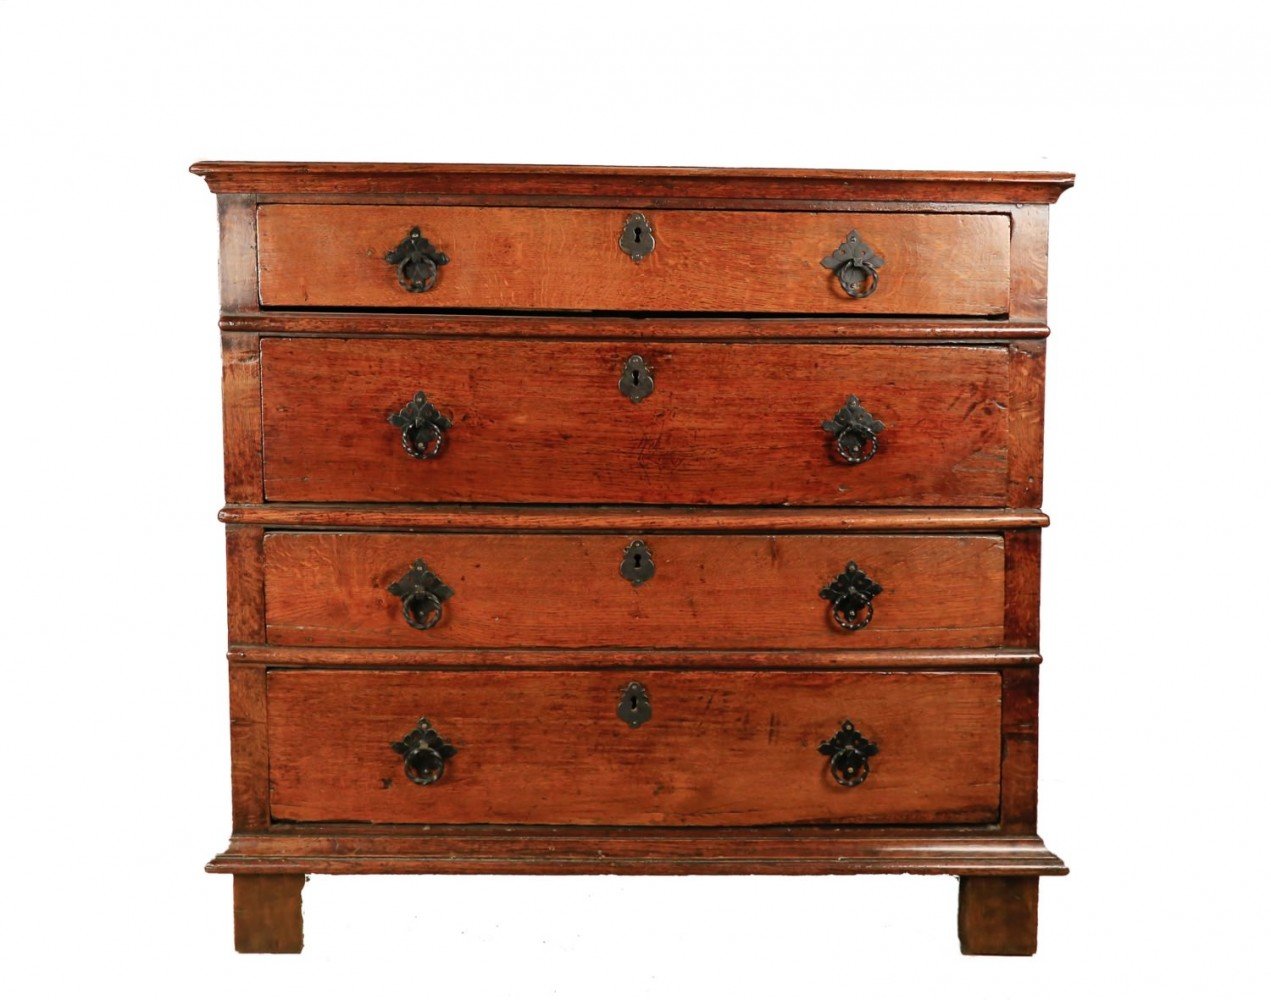 English Oak Chest of drawers, 17thc.